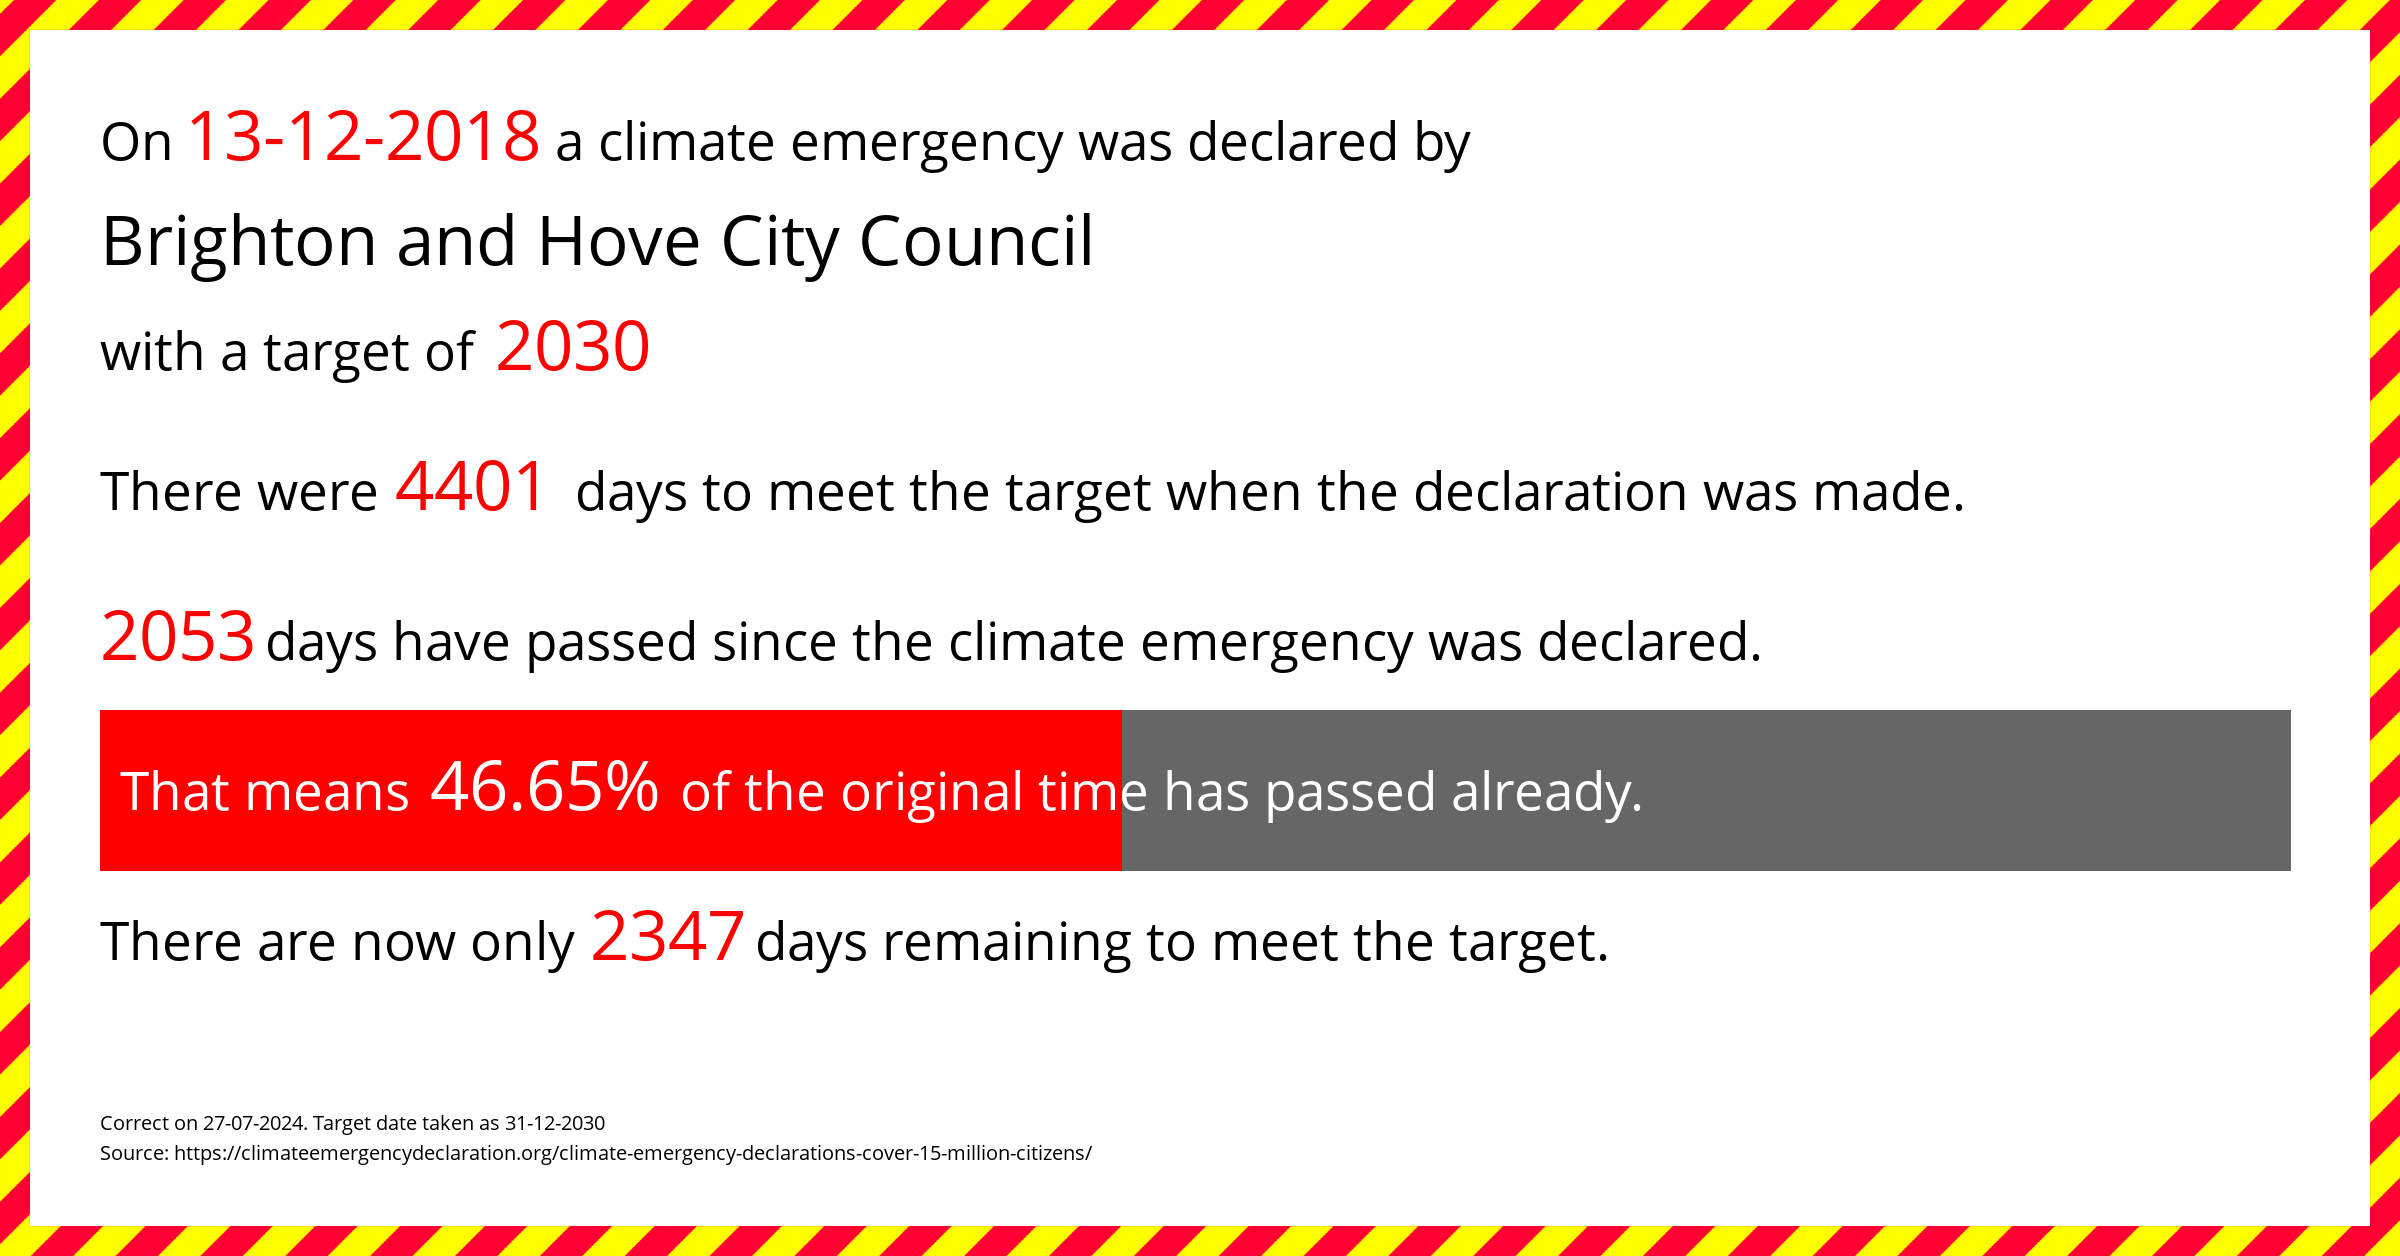 Brighton and Hove City Council declared a Climate emergency on Thursday 13th December 2018, with a target of 2030.